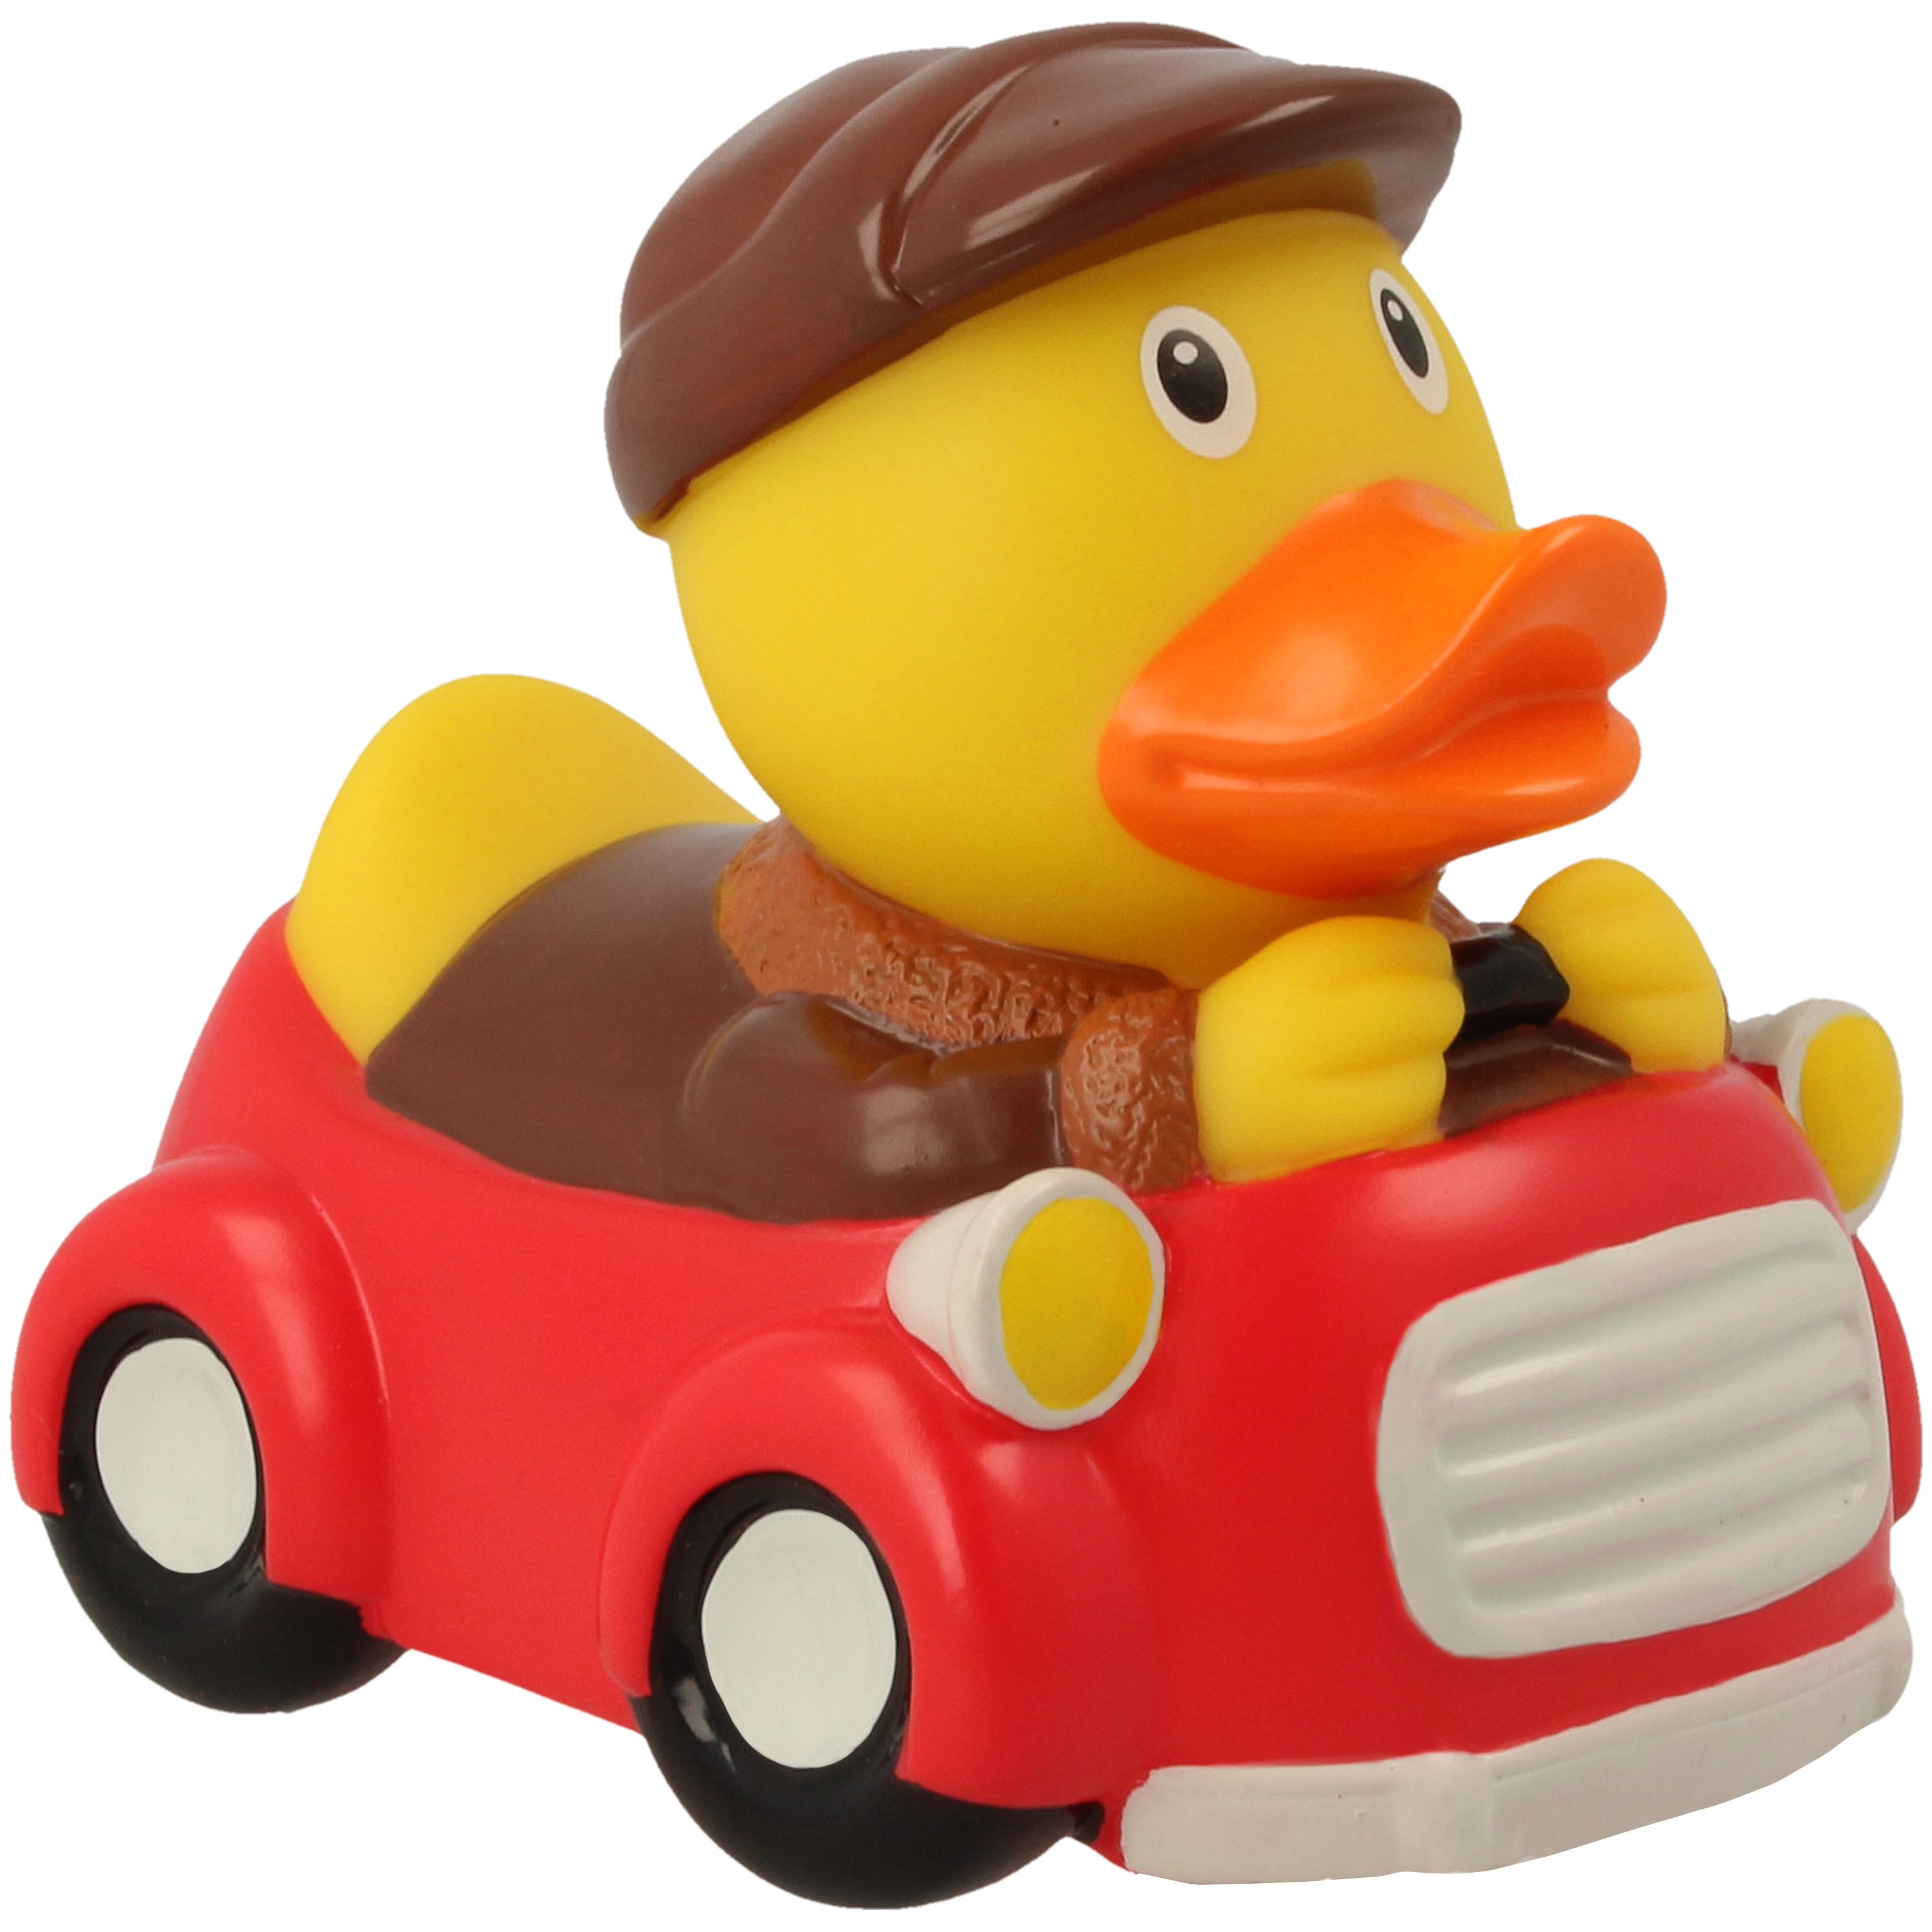 LILALU - SHARE HAPPINESS - Car driver rubber duck - design by LILALU |  LILALU